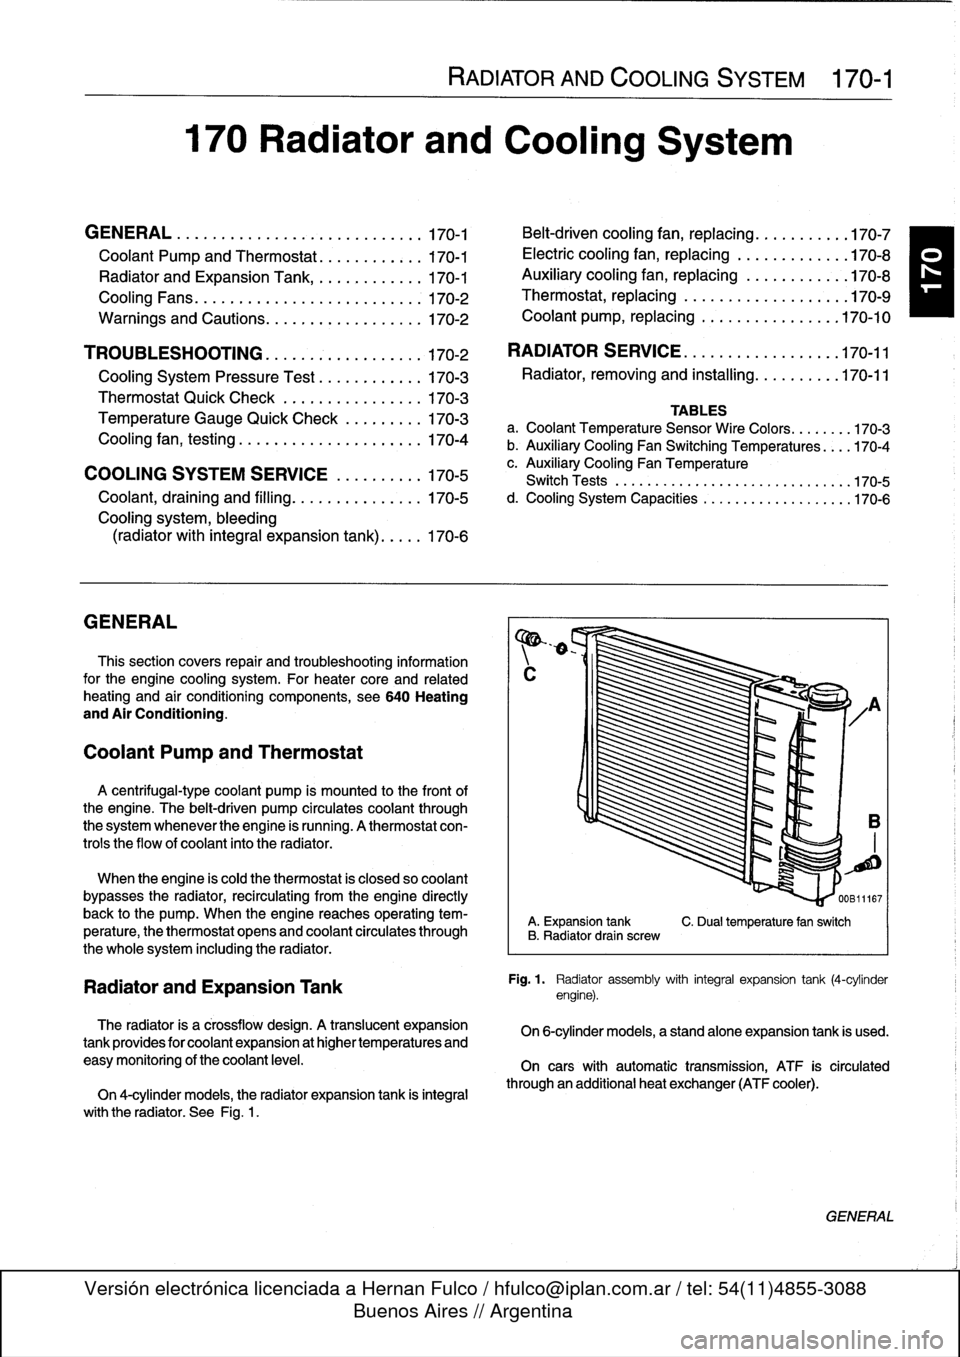 BMW M3 1994 E36 Workshop Manual 170
Radiator
and
Cooling
System

GENERAL
.
.
.....
.
...
.
.
.
.
.
....
.
.
.
.
.
.
.
.170-1

Coolant
Pump
and
Thermostat
........
.
.
.
.
170-1

Radiator
and
Expansion
Tank
.........
.
...
170-1

Coo